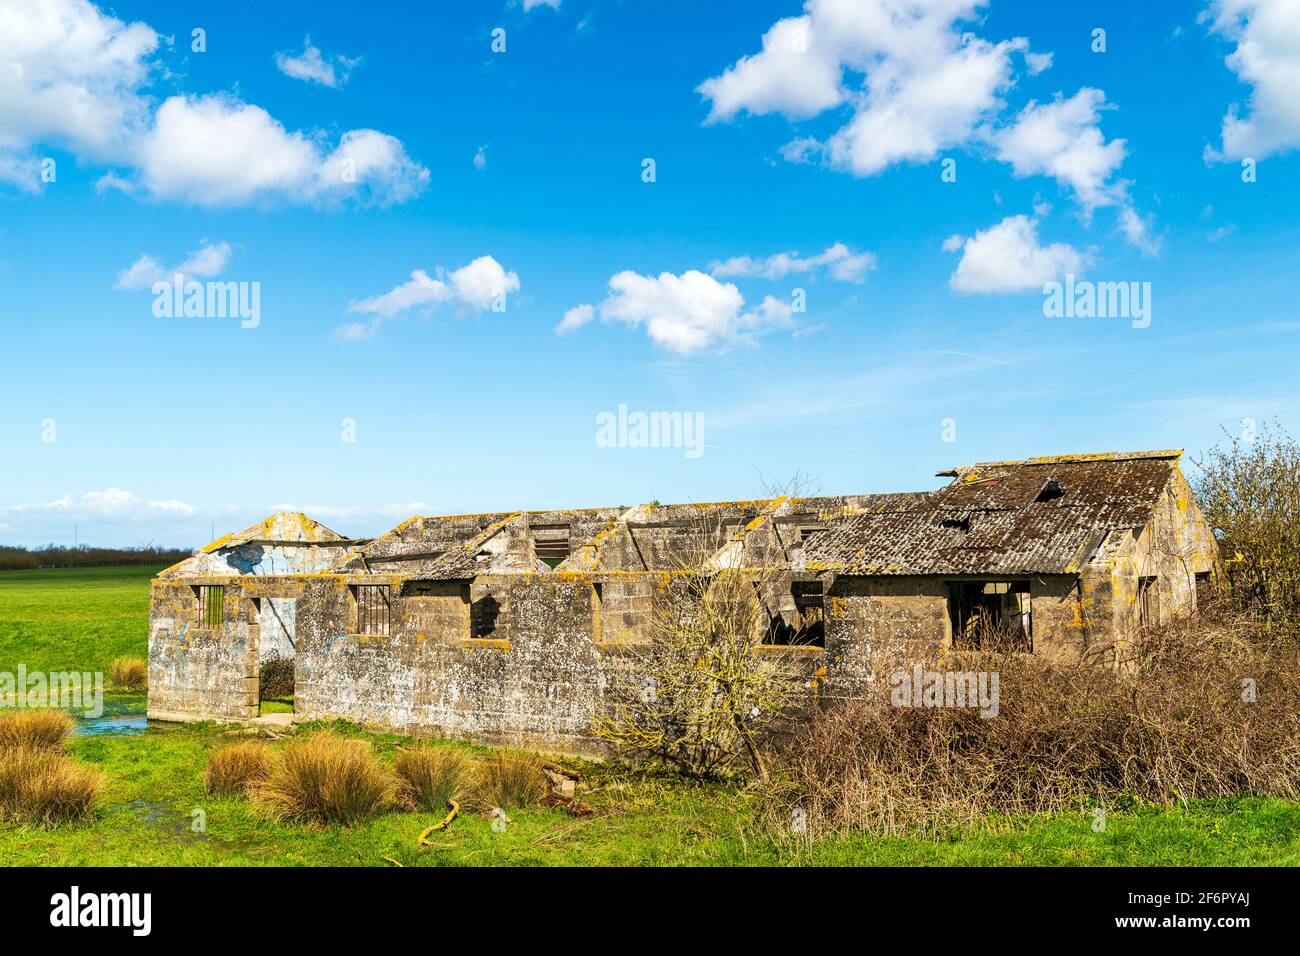 Abandoned one story breeze block roofless building formally used as a world war one prison out on farmland at Richborough, Kent. Blue sky, springtime. Stock Photo